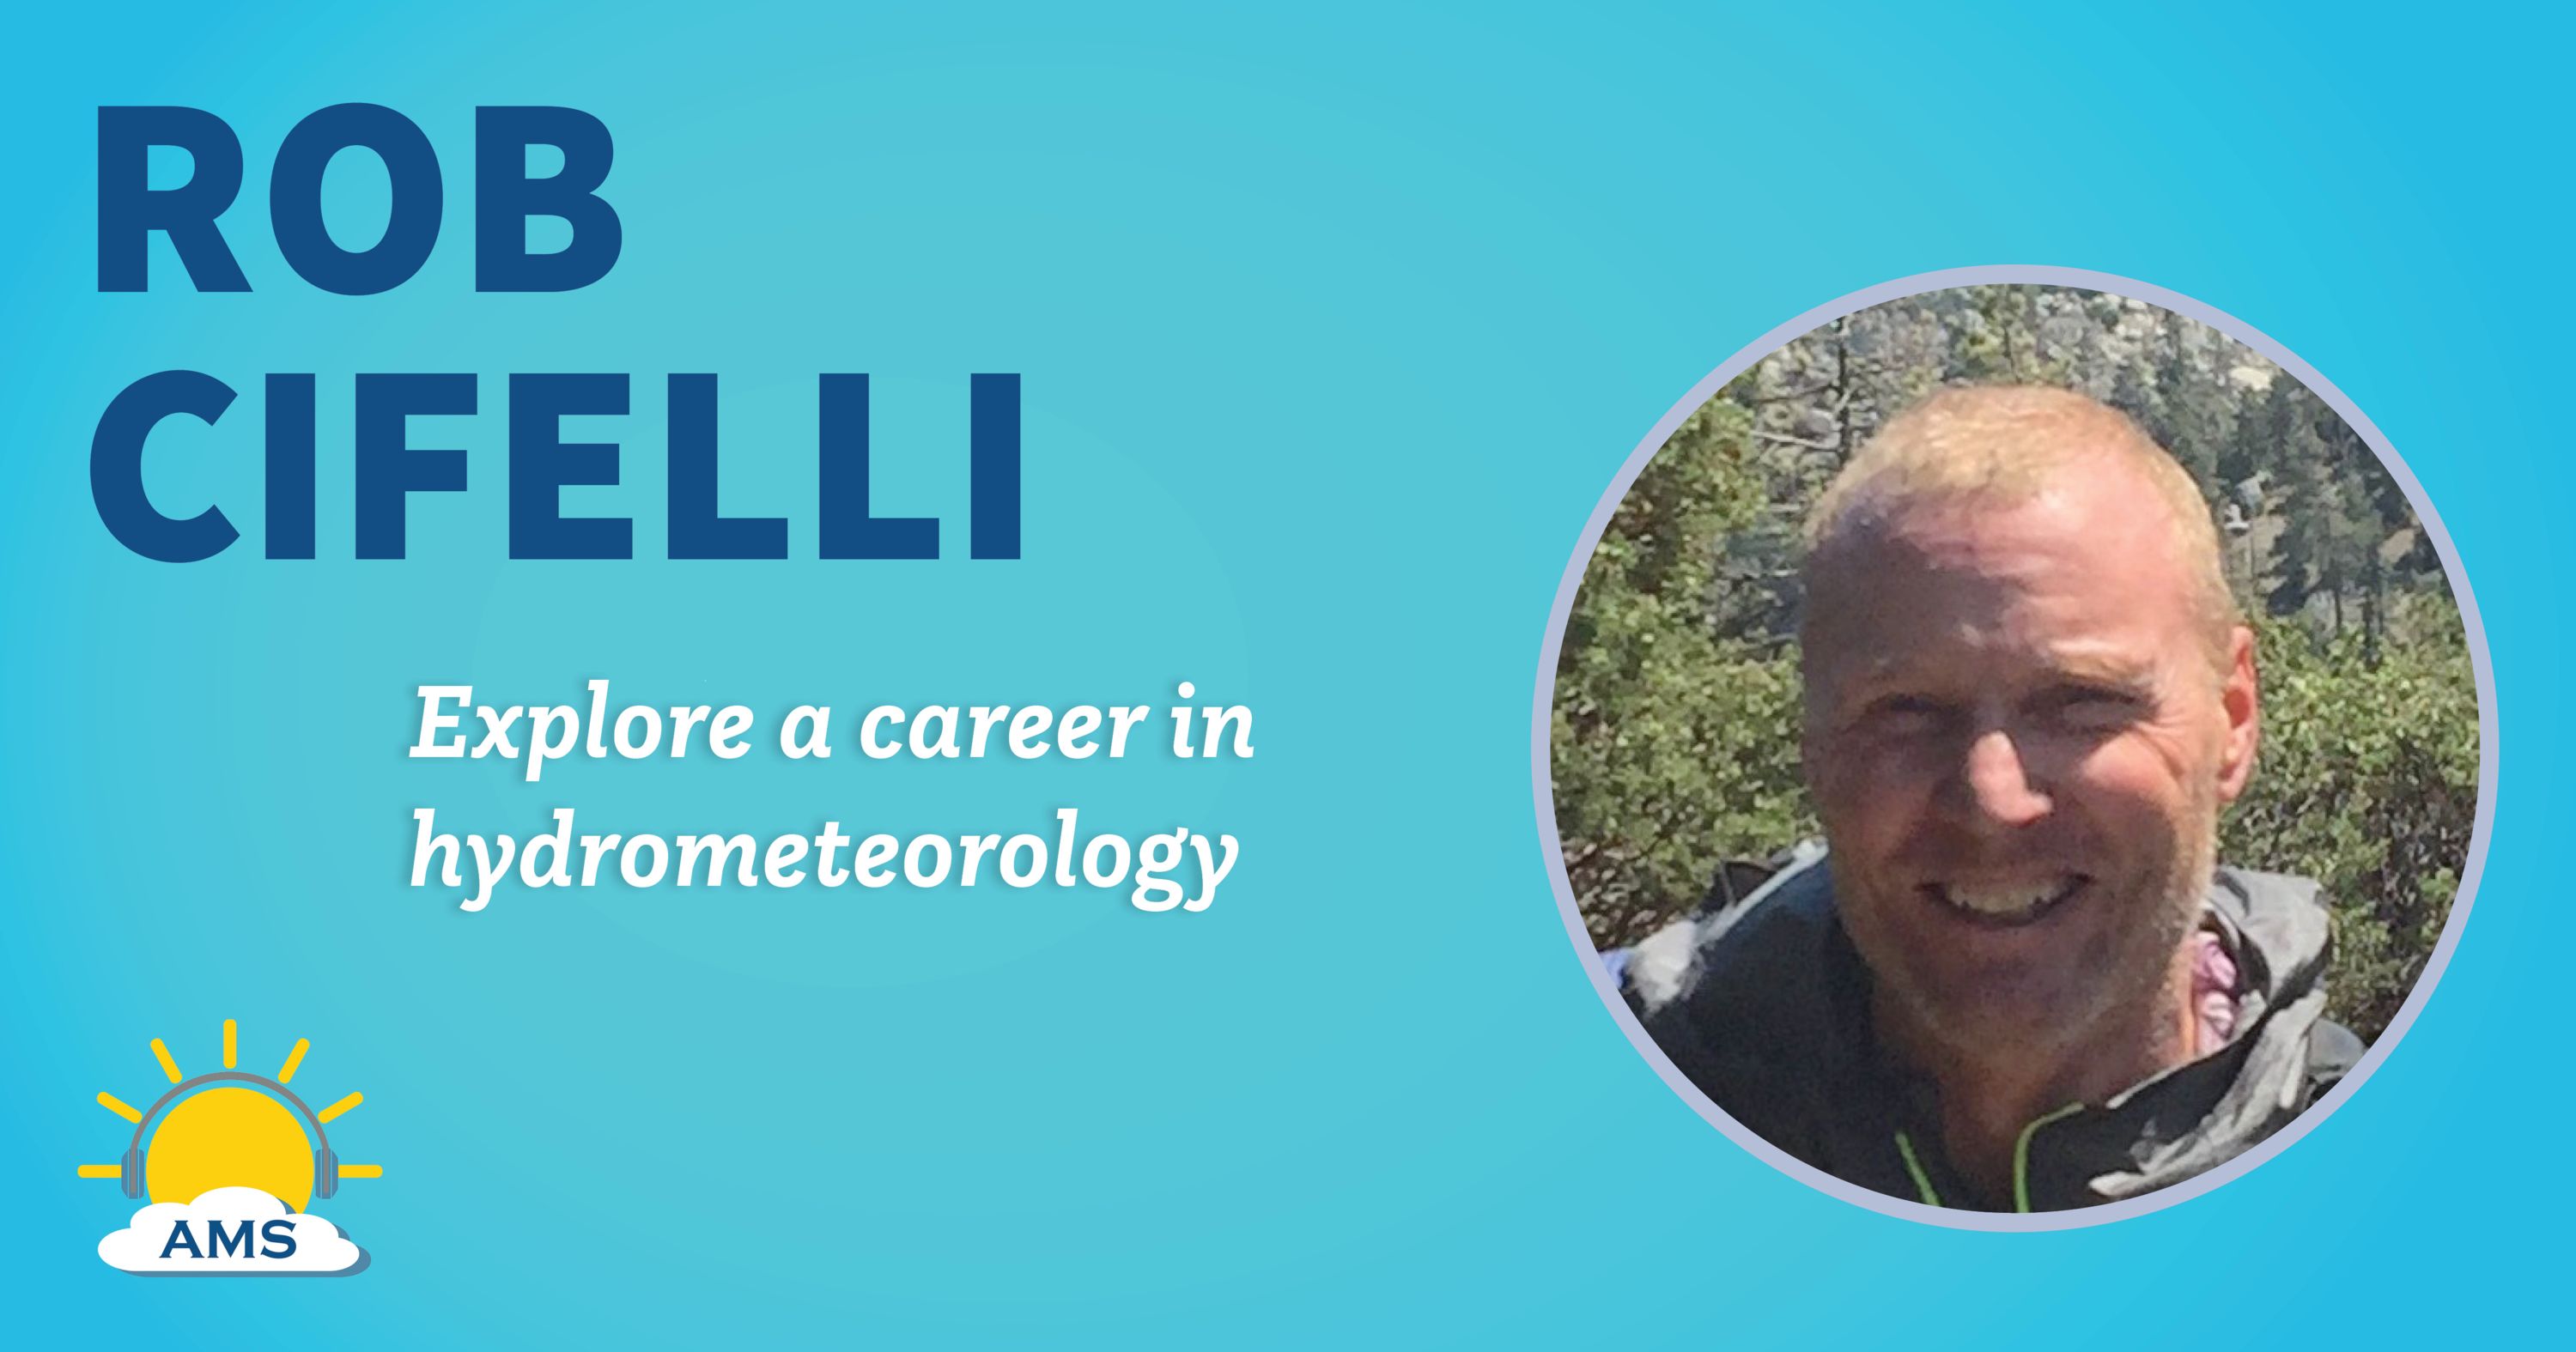 rob cifelli headshot graphic with teaser text that reads &quotexplore a career in hydrometeorology"